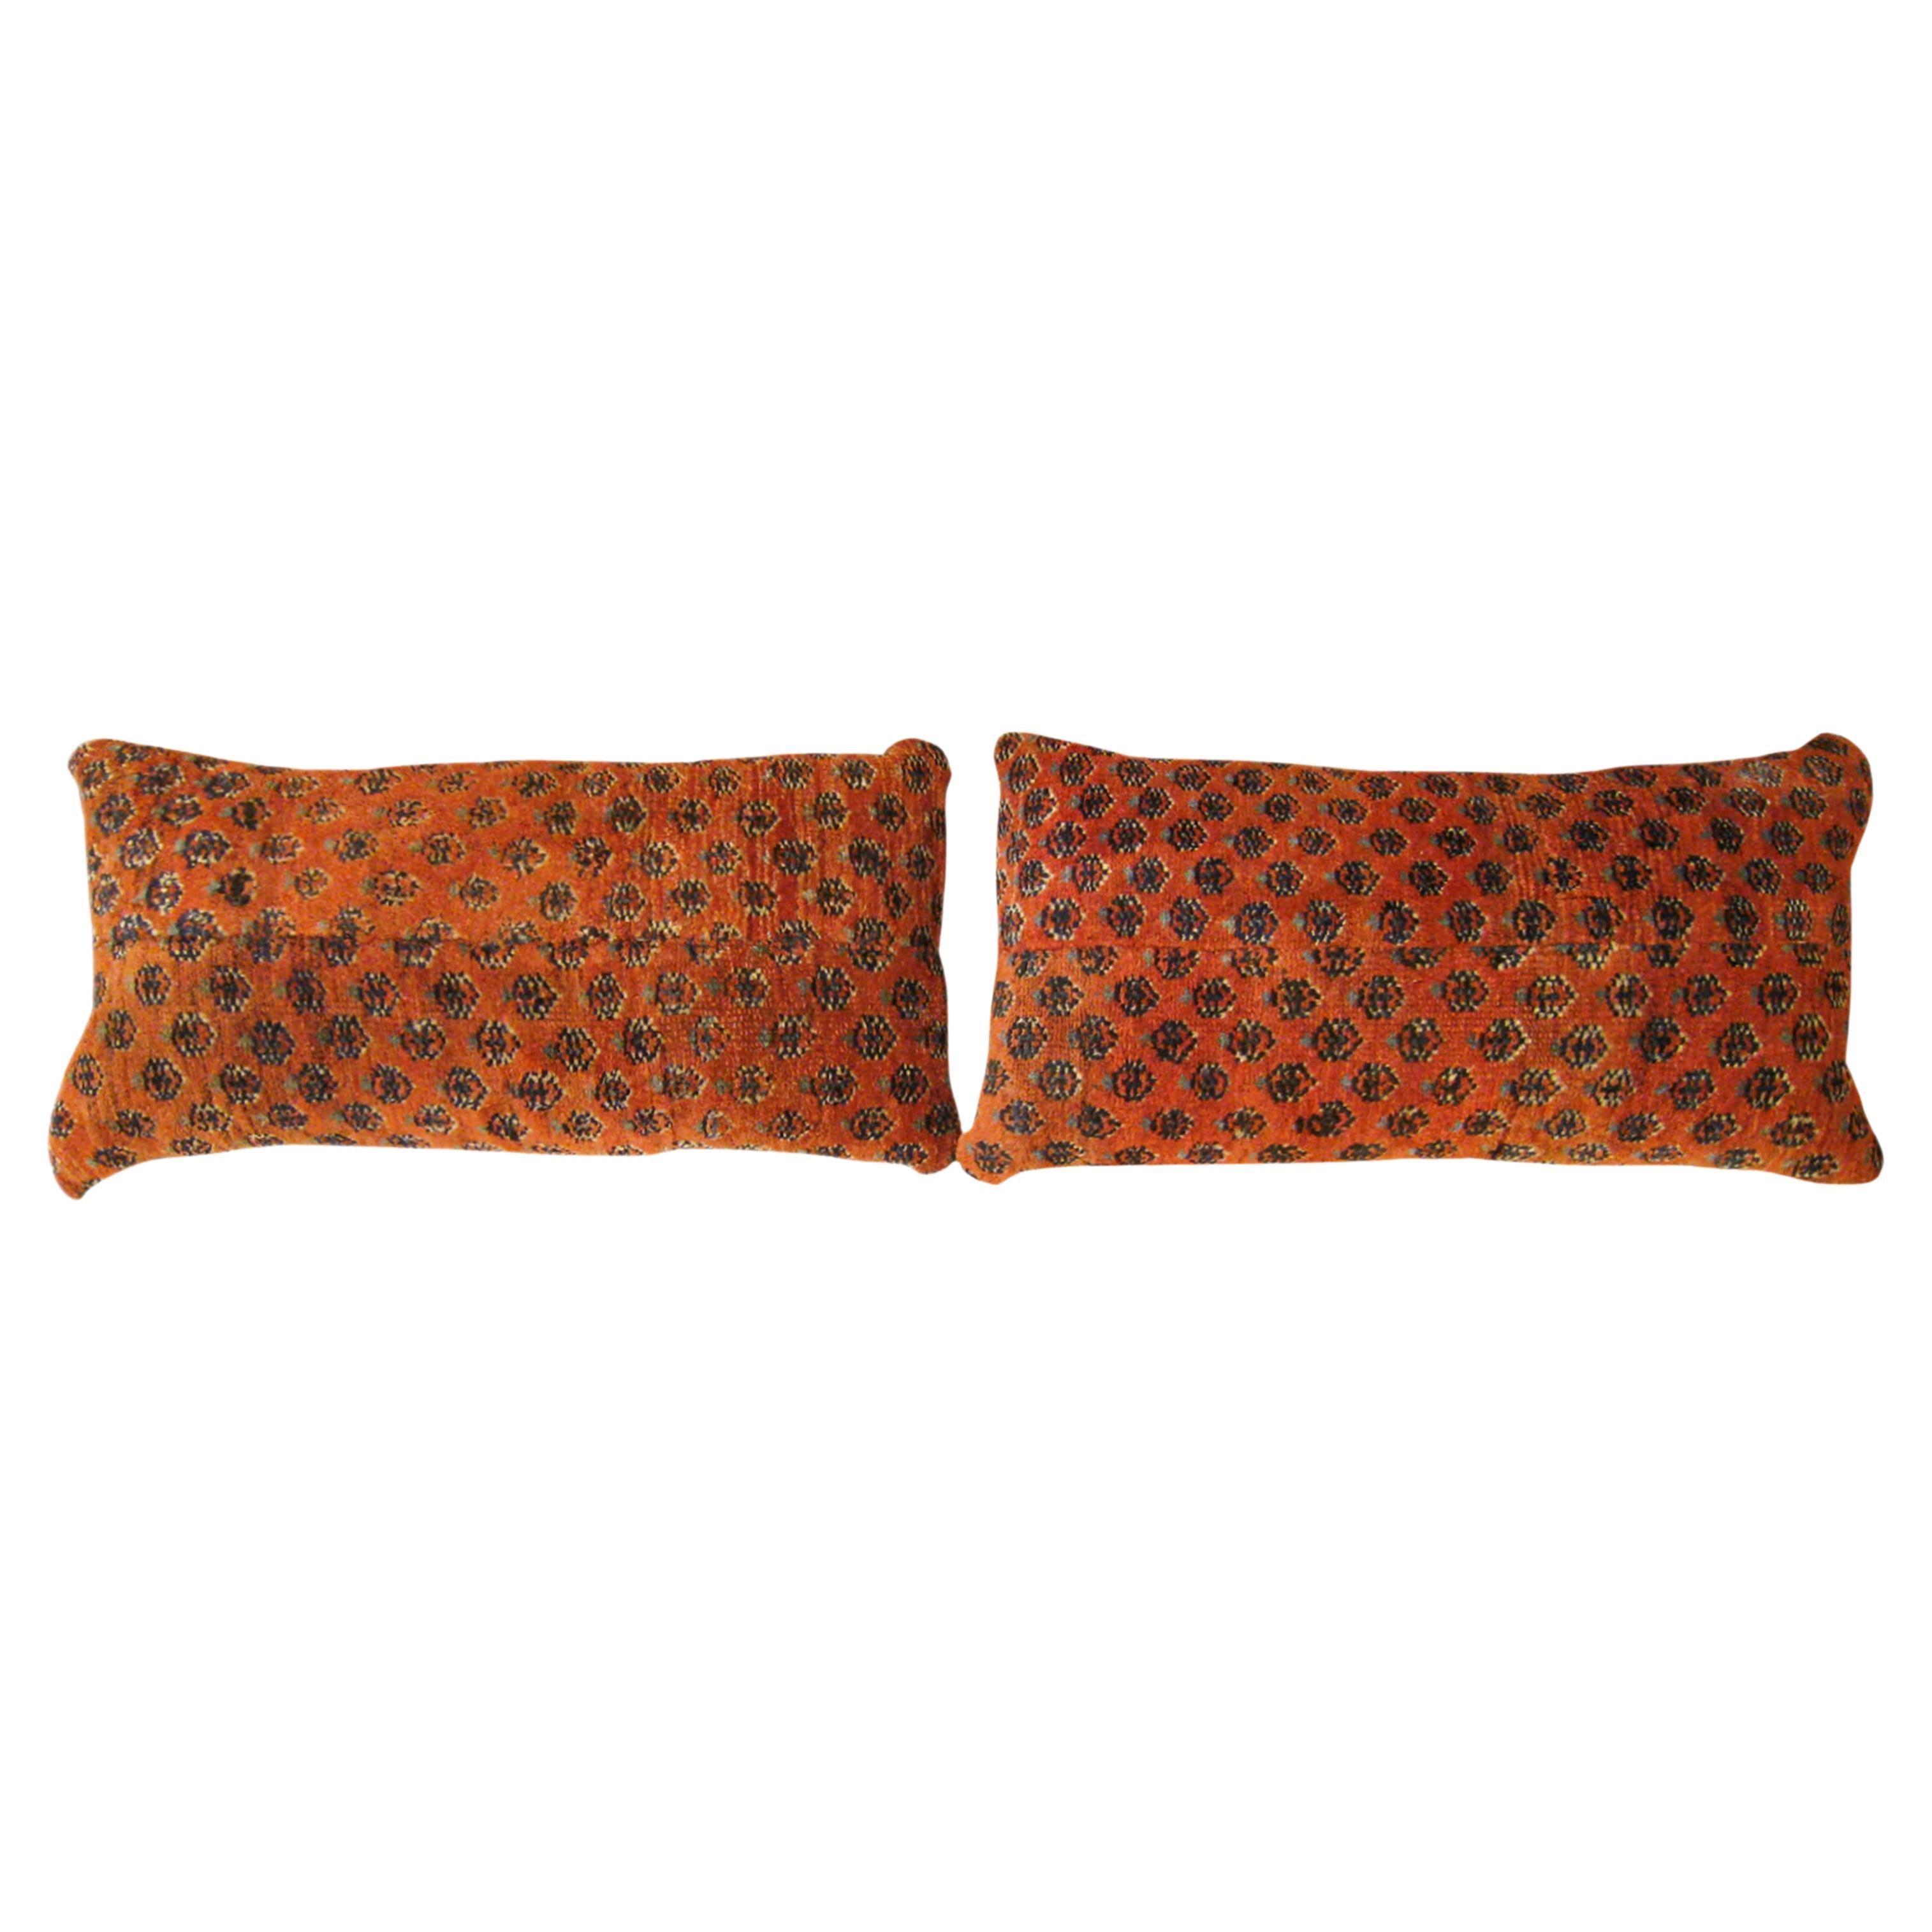 Pair of Decorative Antique Persian Saraband Carpet Pillows with Floral Element For Sale